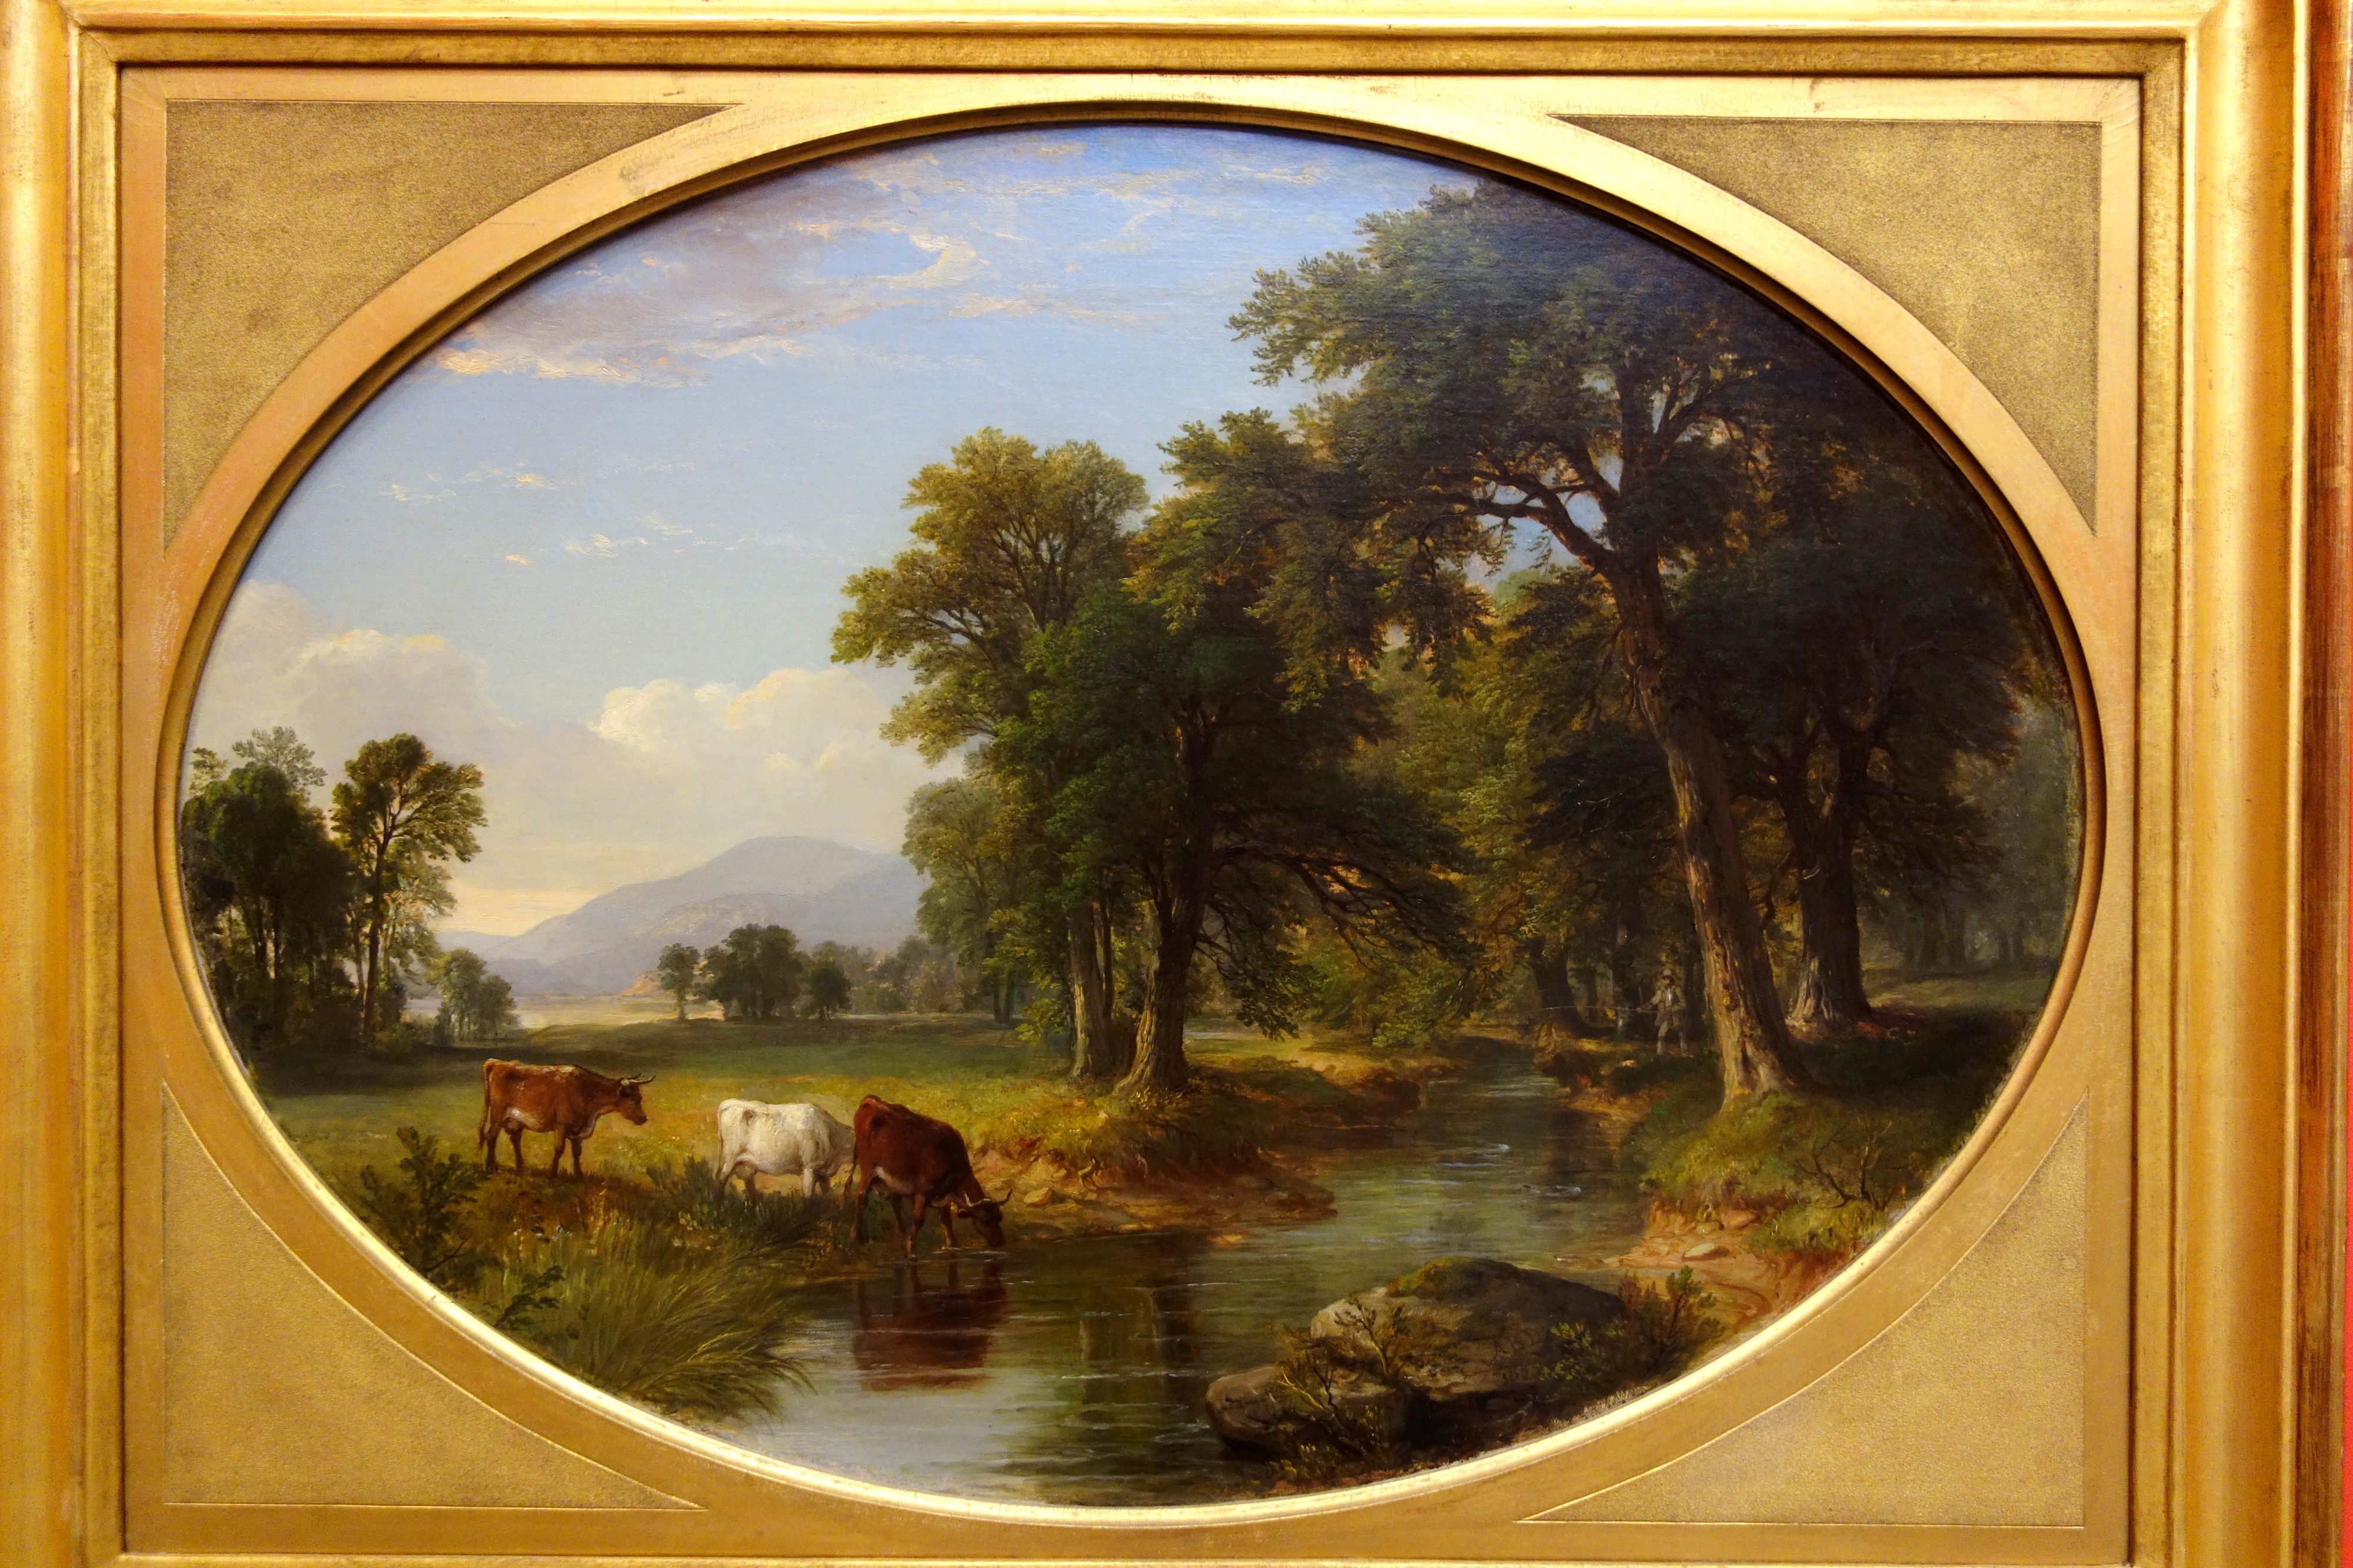 Catskill Creek (Summer Afternoon) by Asher B. Durand, 1855, oil on canvas - Albany Institute of History and Art - DSC08138